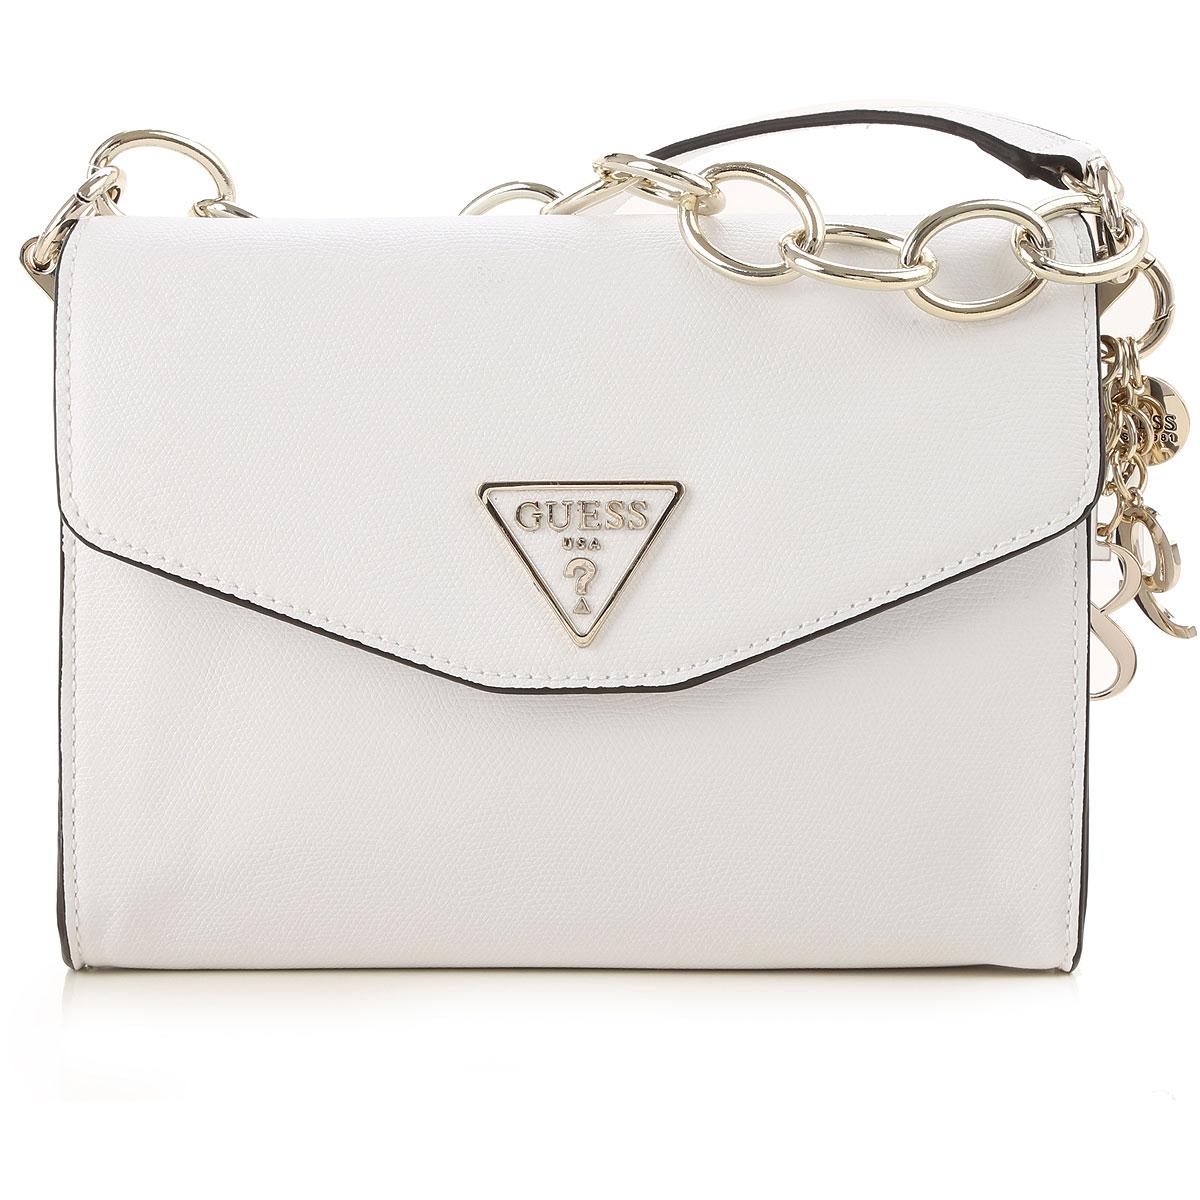 Guess Shoulder Bag For Women On Sale in White - Lyst